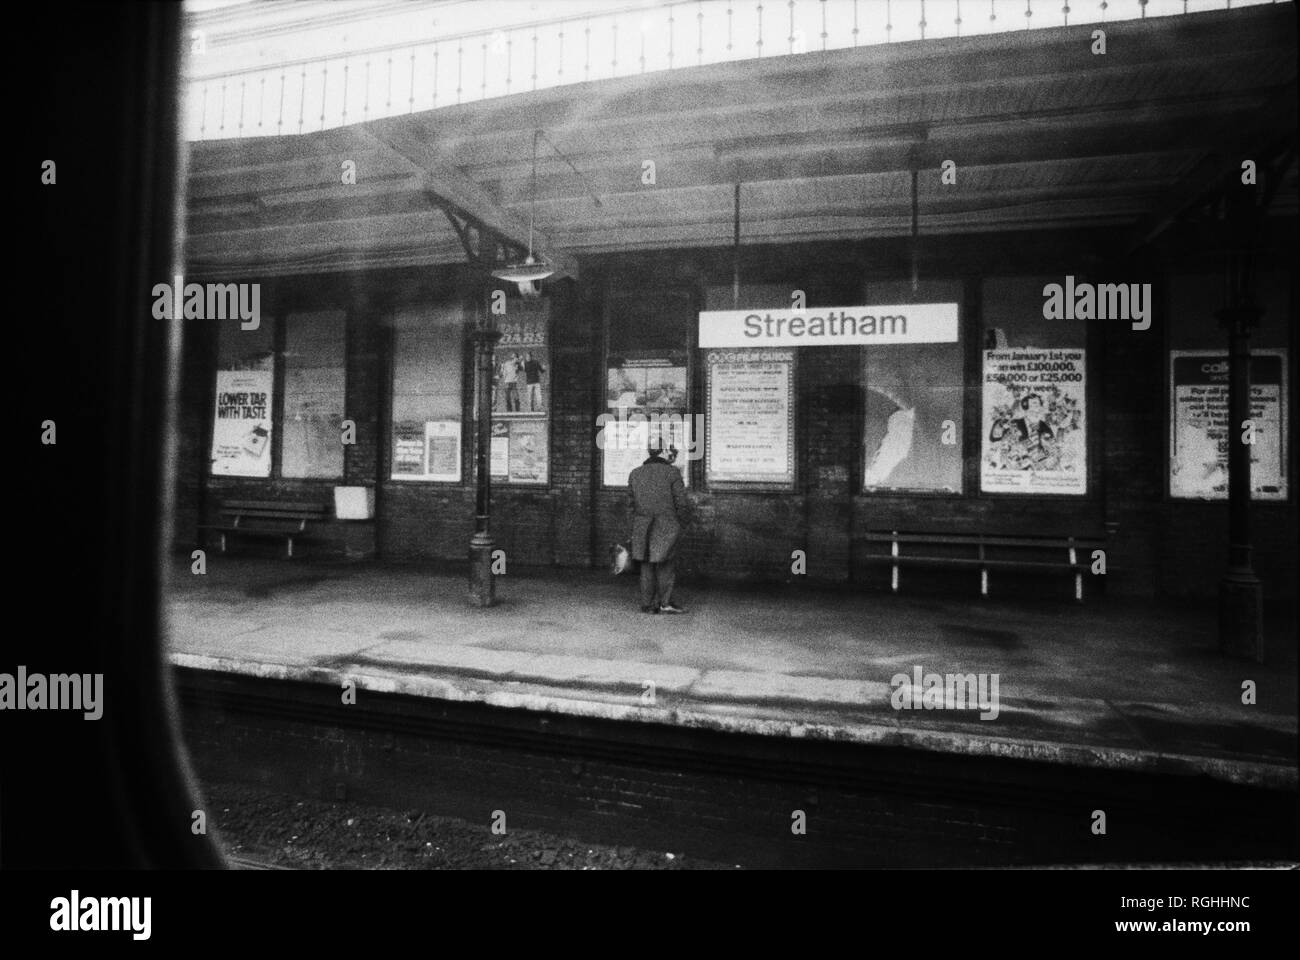 Archive image of a lone male standing on Streatham British Rail station, London, England, 1979, seem through the window of a slam-door train Stock Photo